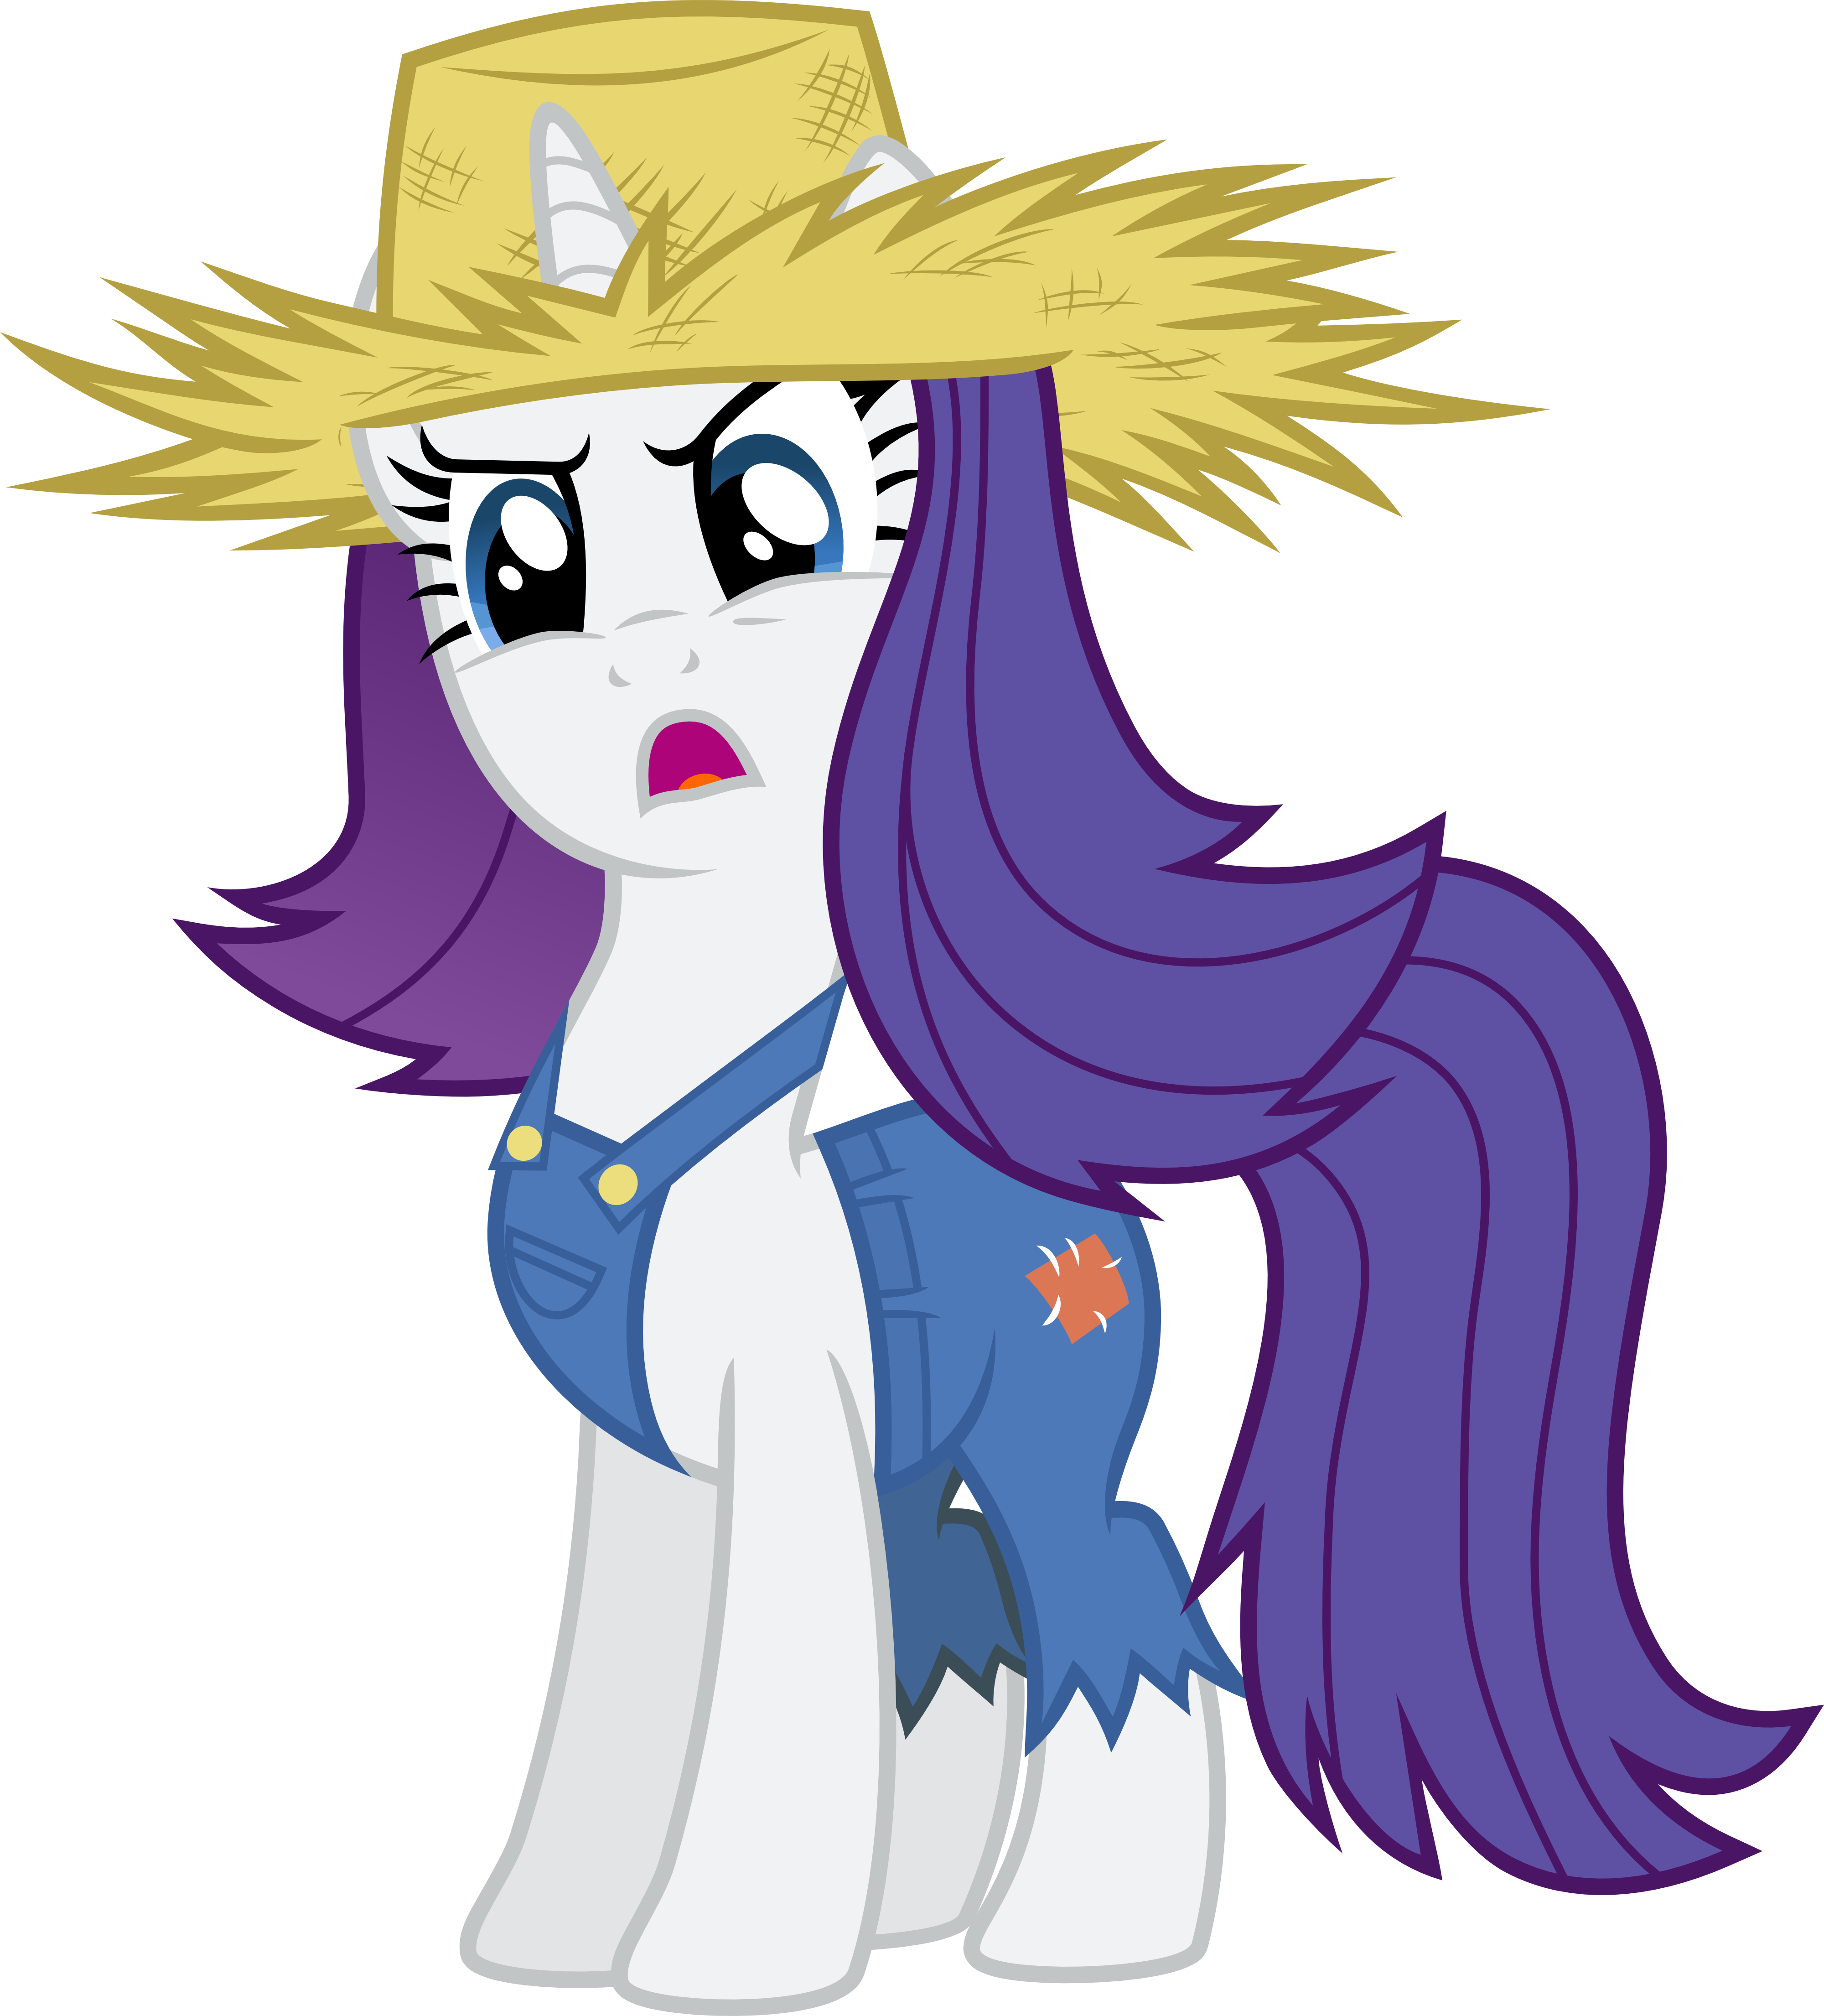 rarity_what_s_so_funny_by_jeatz_axl-d8iynak.png